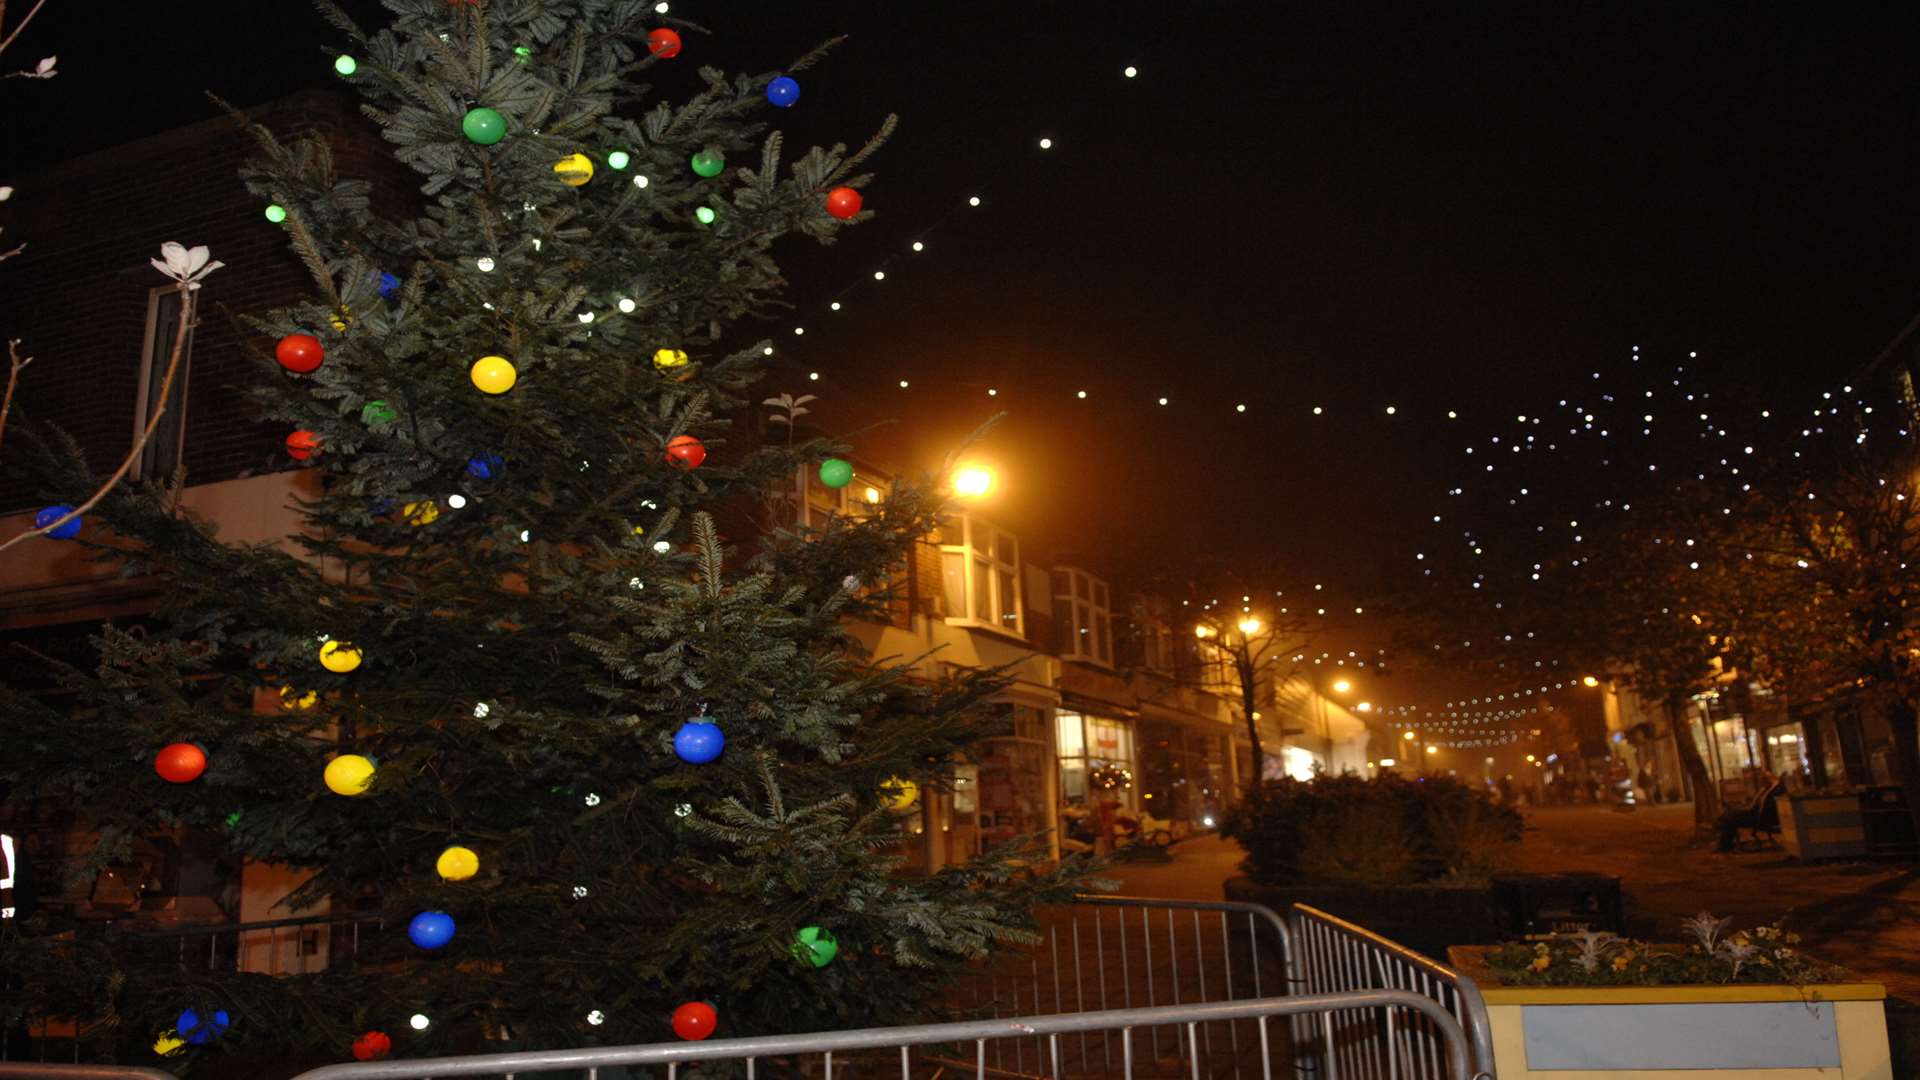 Herne Bay is set to sparkle this Christmas